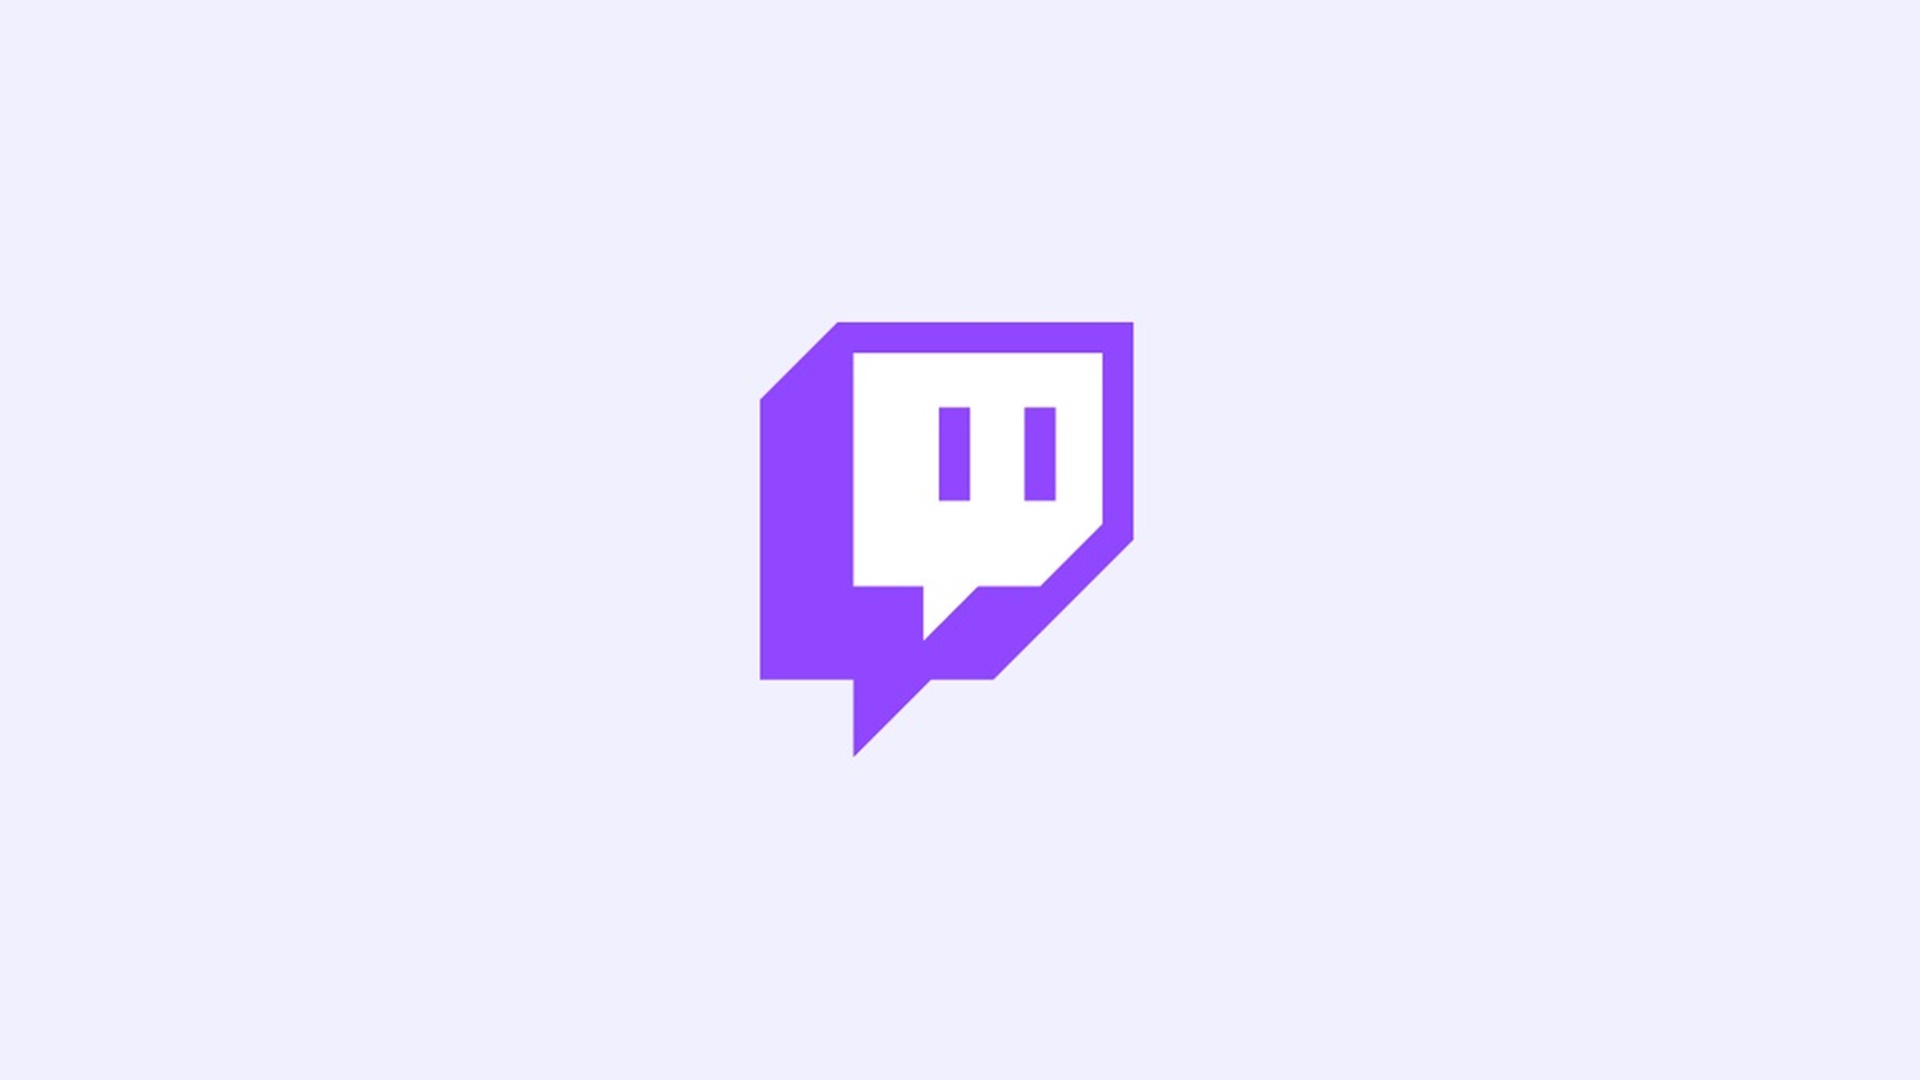 Twitch confirms that full credit card numbers were not exposed during recent data breach